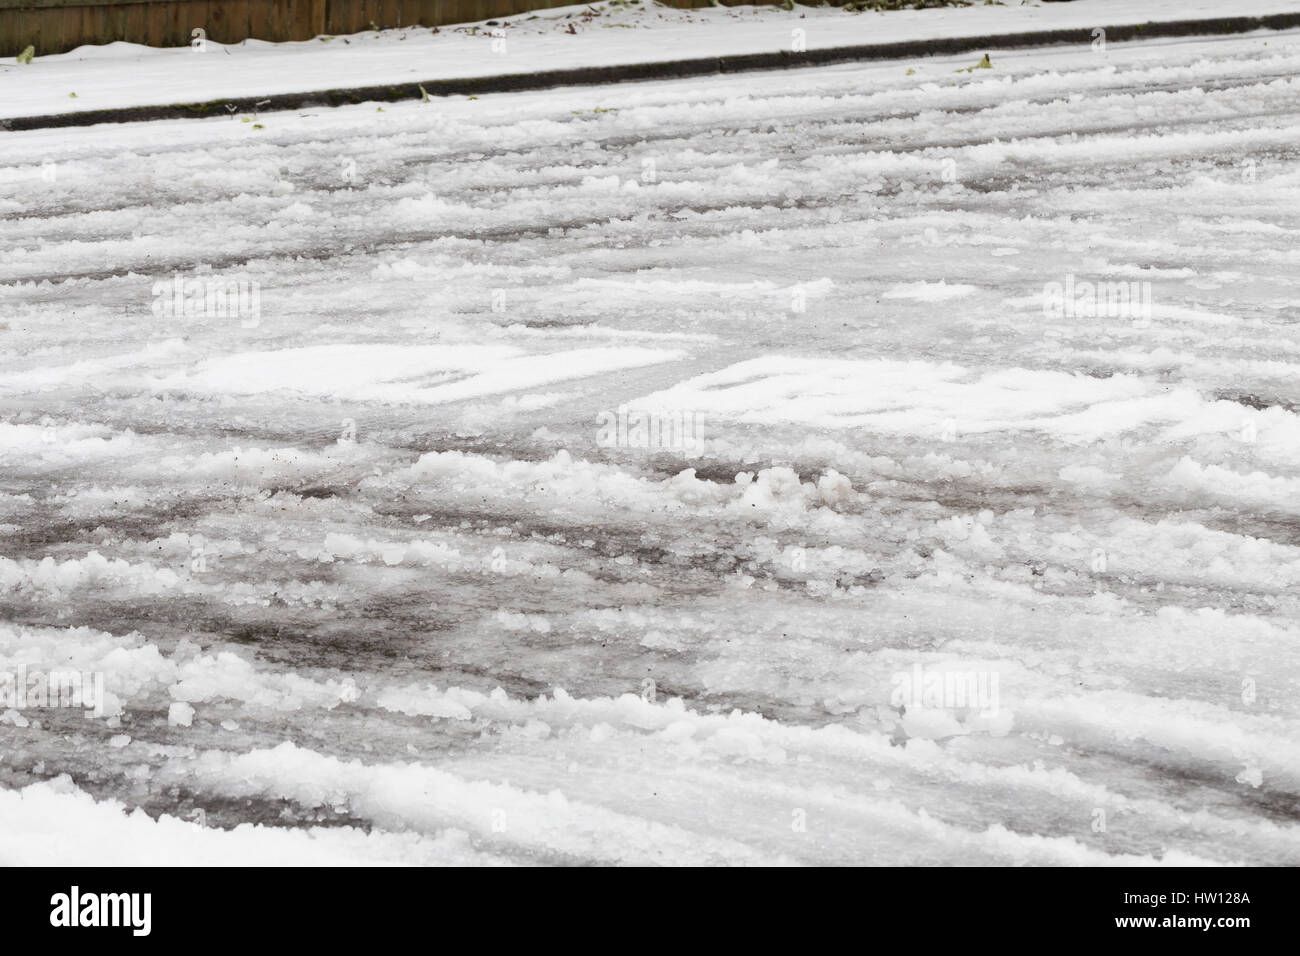 Very dangerous freezing rain over snow covered roads during a winter ice storm in Eugene Oregon. Stock Photo